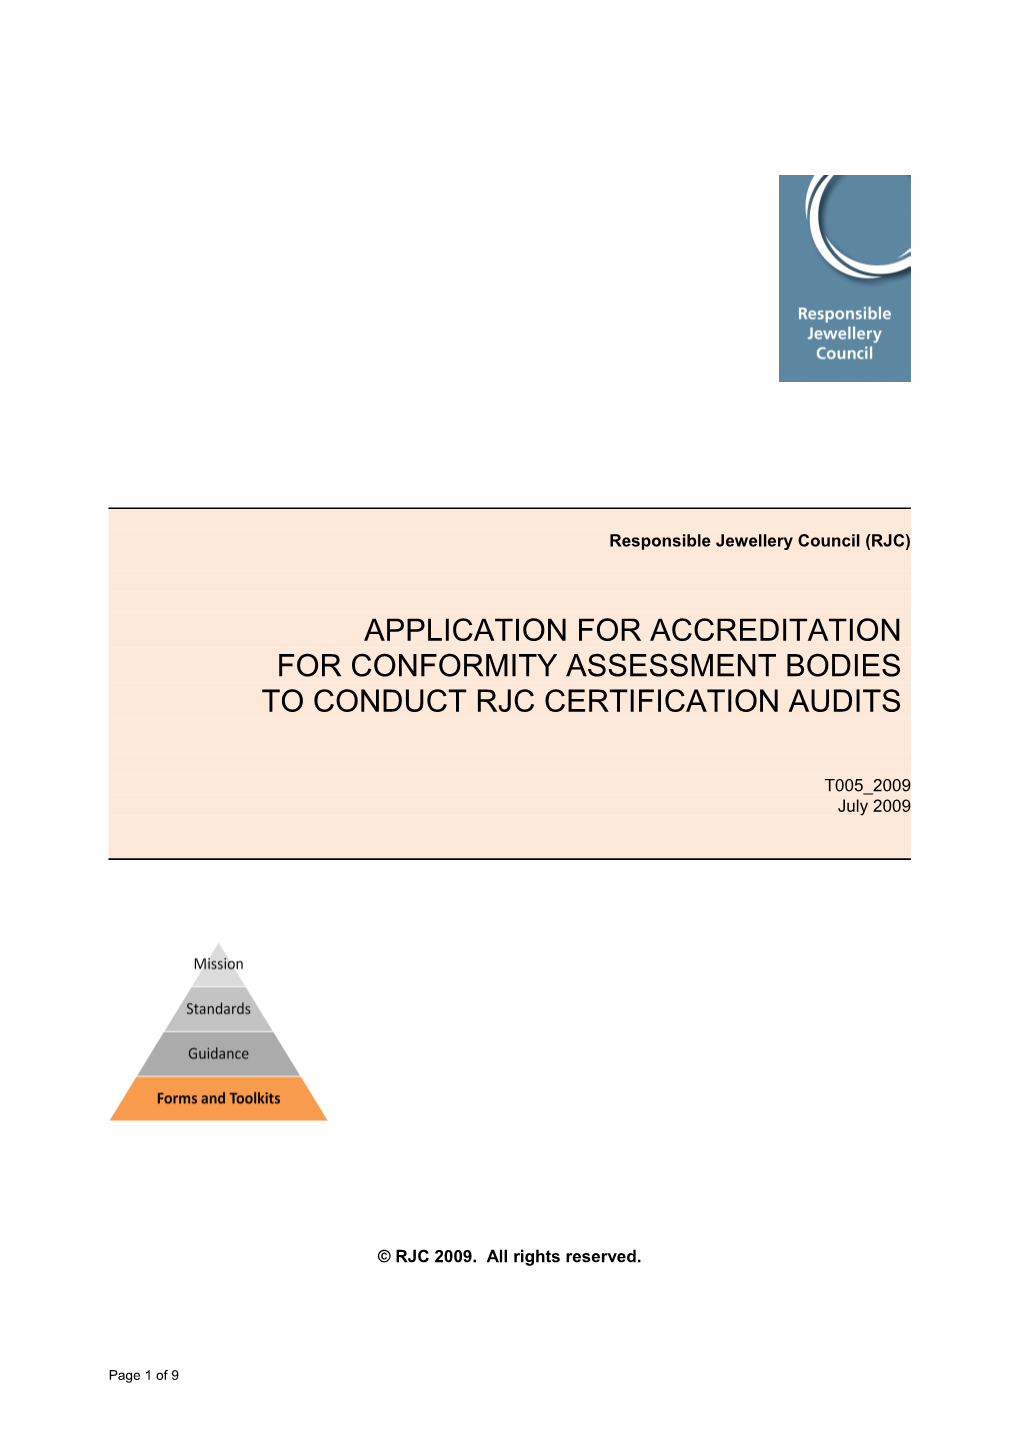 Application for Accreditation for Conformity Assessment Bodies to Conduct Rjc Certification